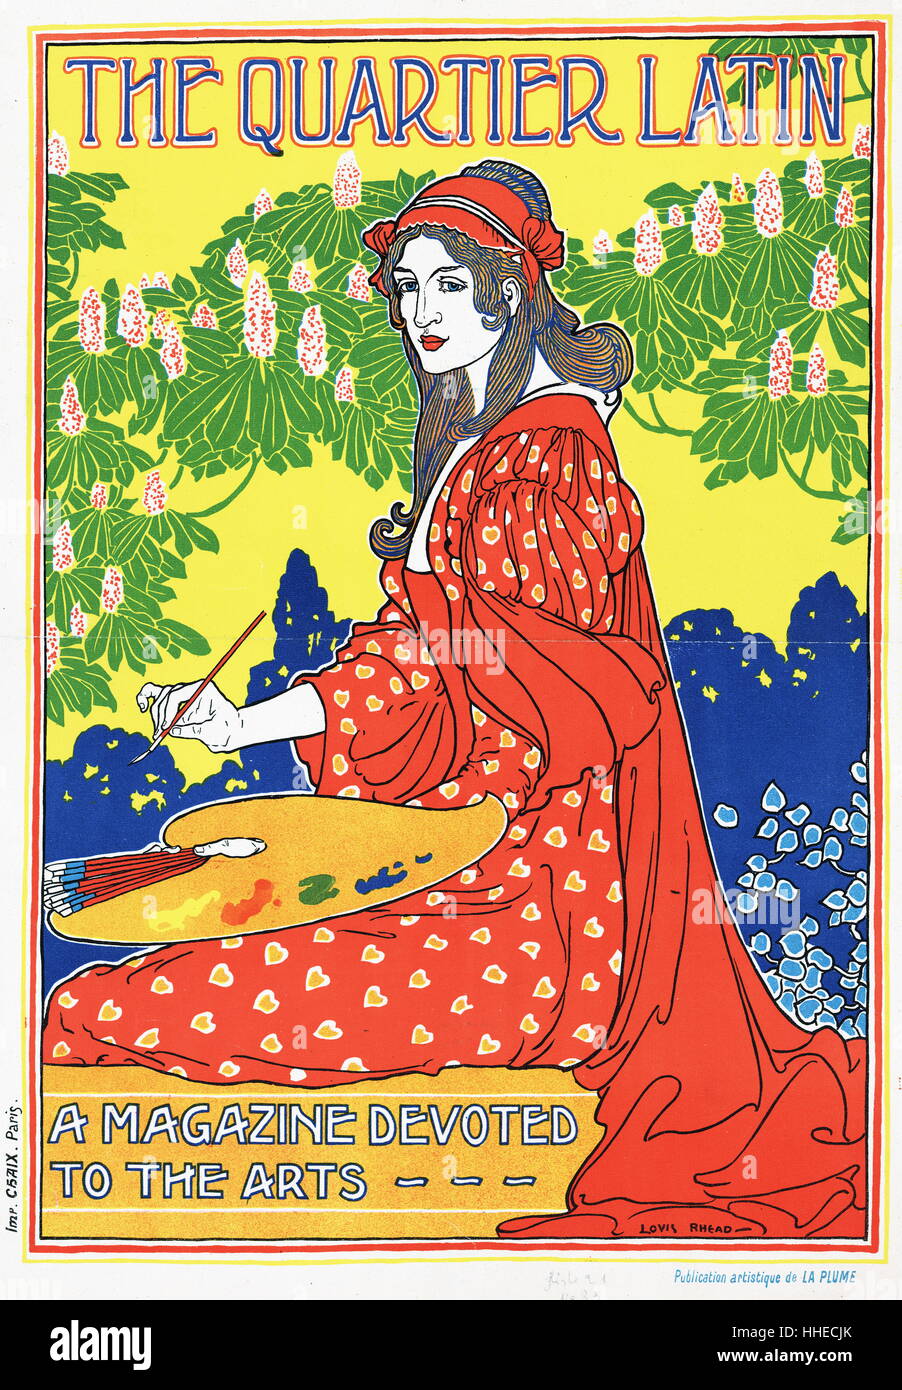 The Quartier Latin. A magazine devoted to the arts designed by Louis Rhead, 1857-1926, artist. Published in Paris between 1890 and 1900 the art nouveau covers shows a seated woman holding a palette and paint brushes. Stock Photo